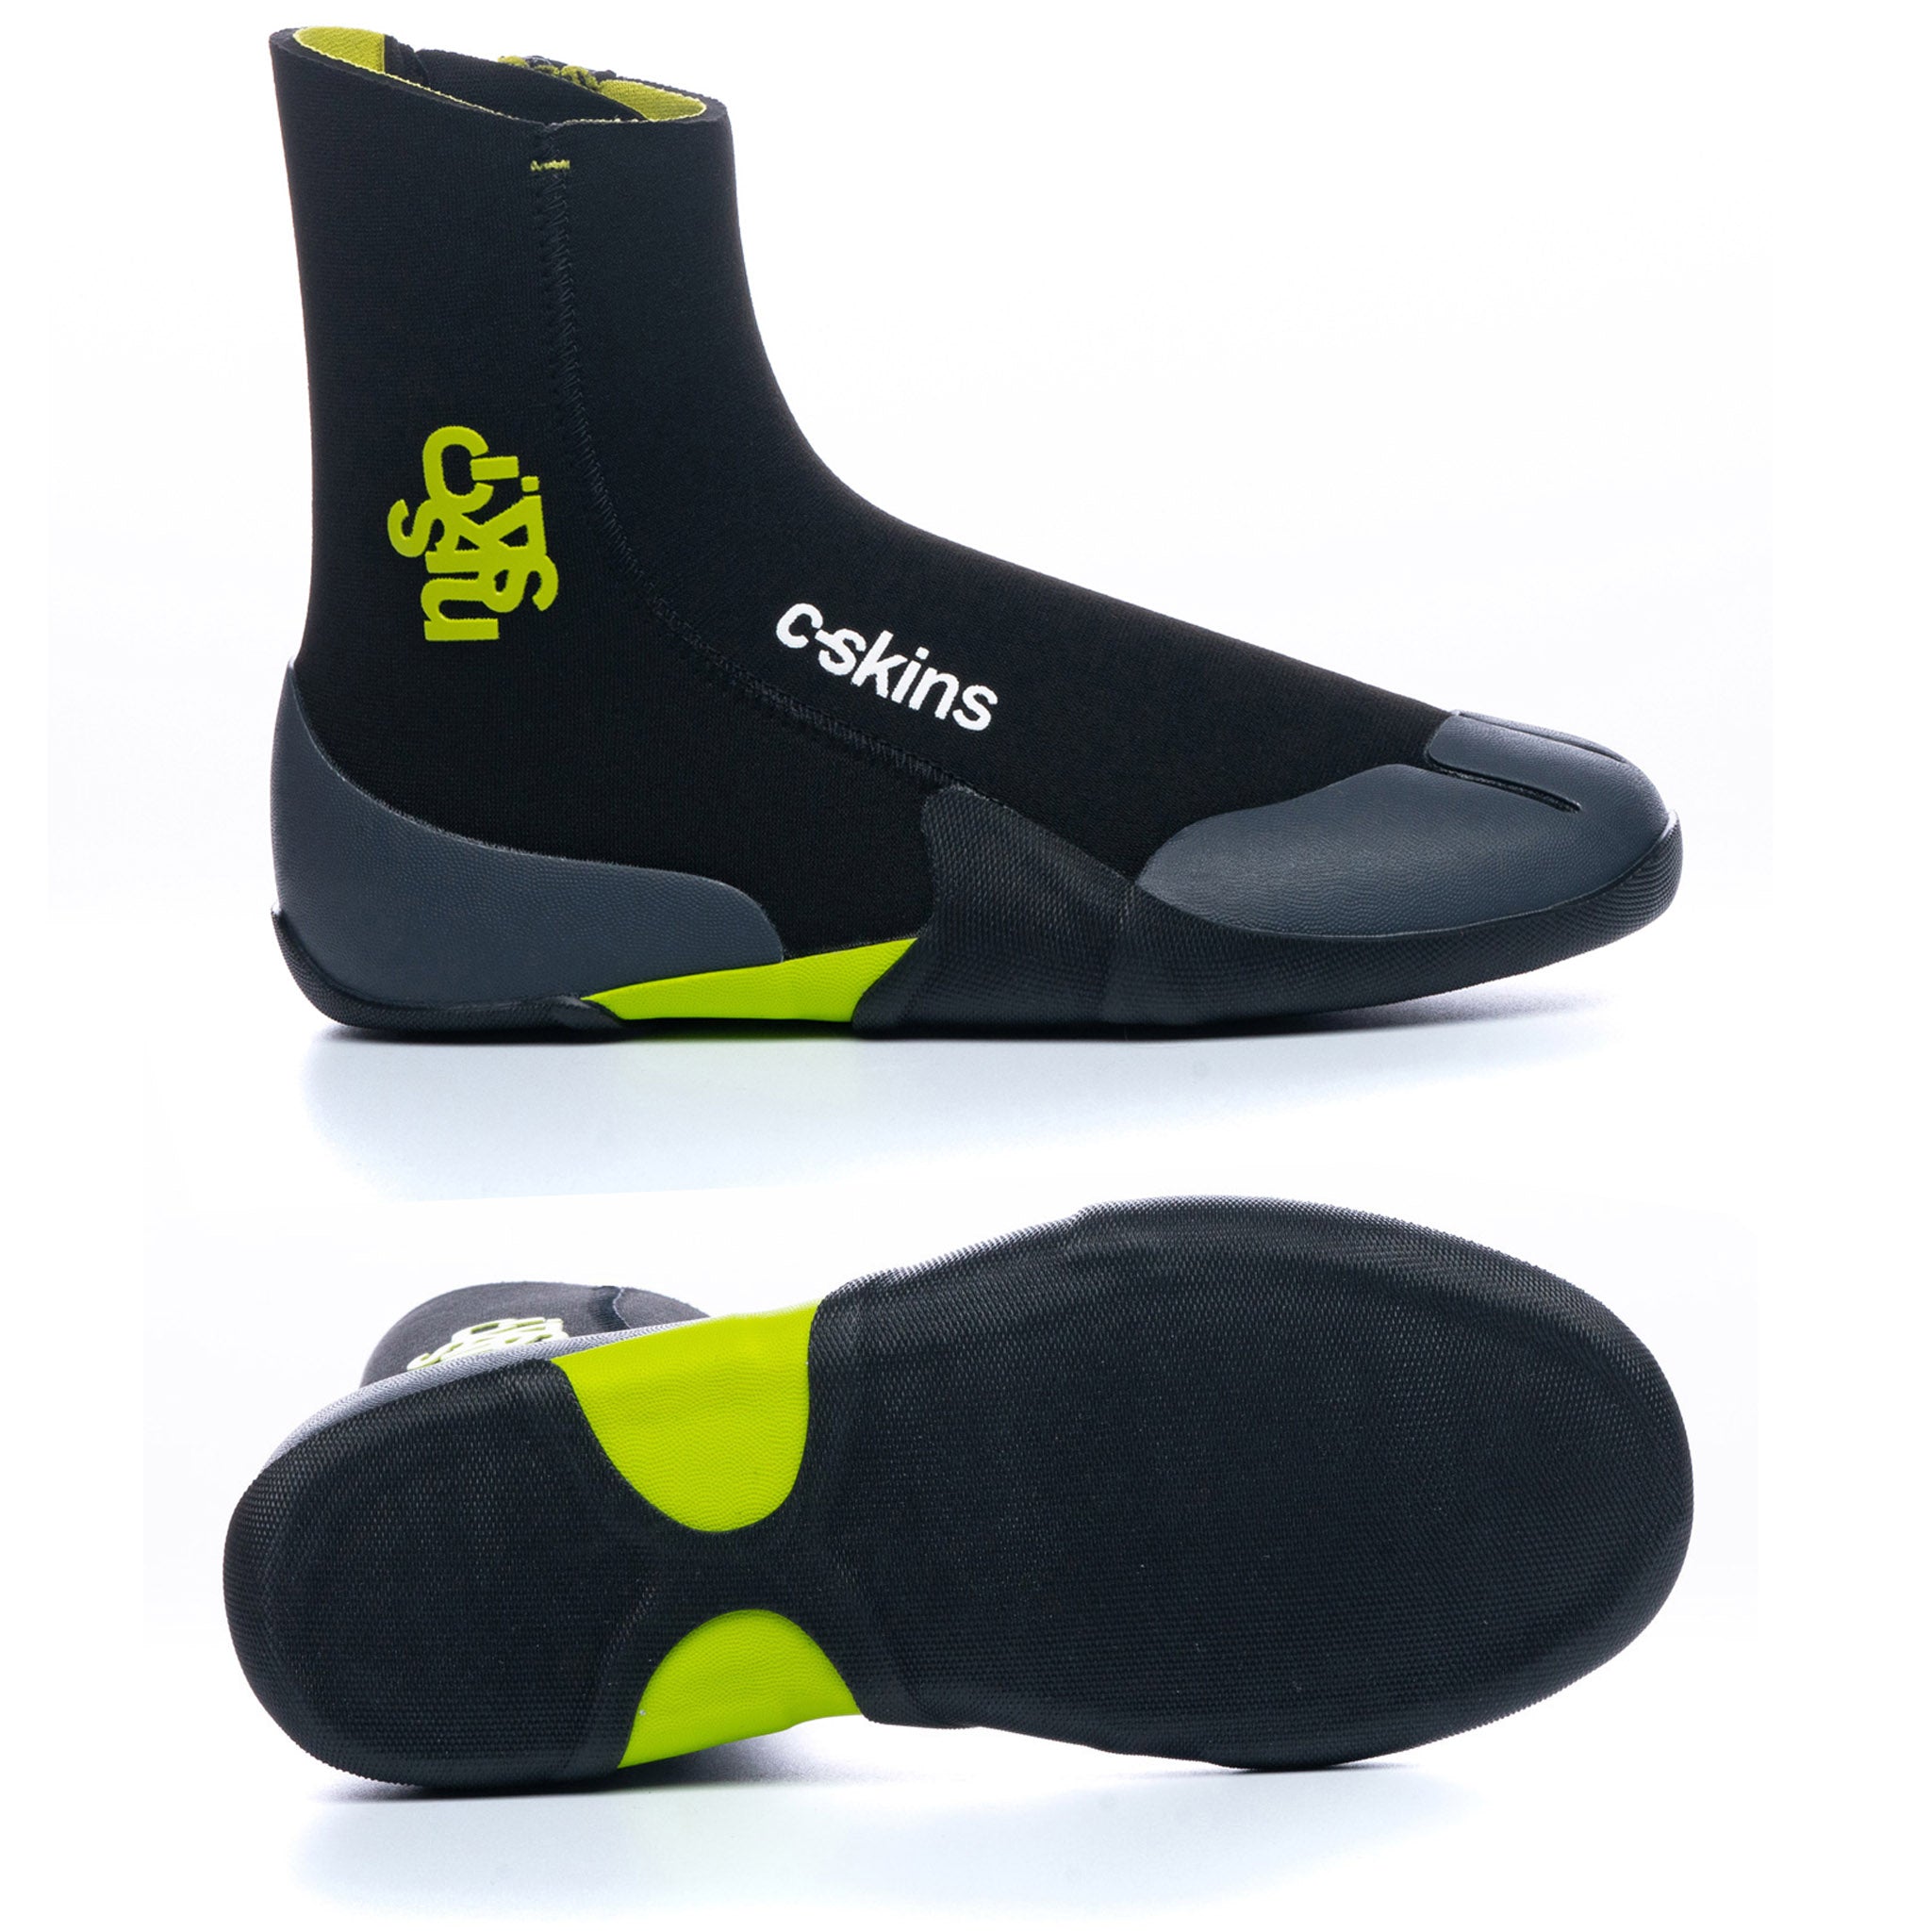 C-Skins Legend 5mm Junior Wetsuit Boots - Side and Sole